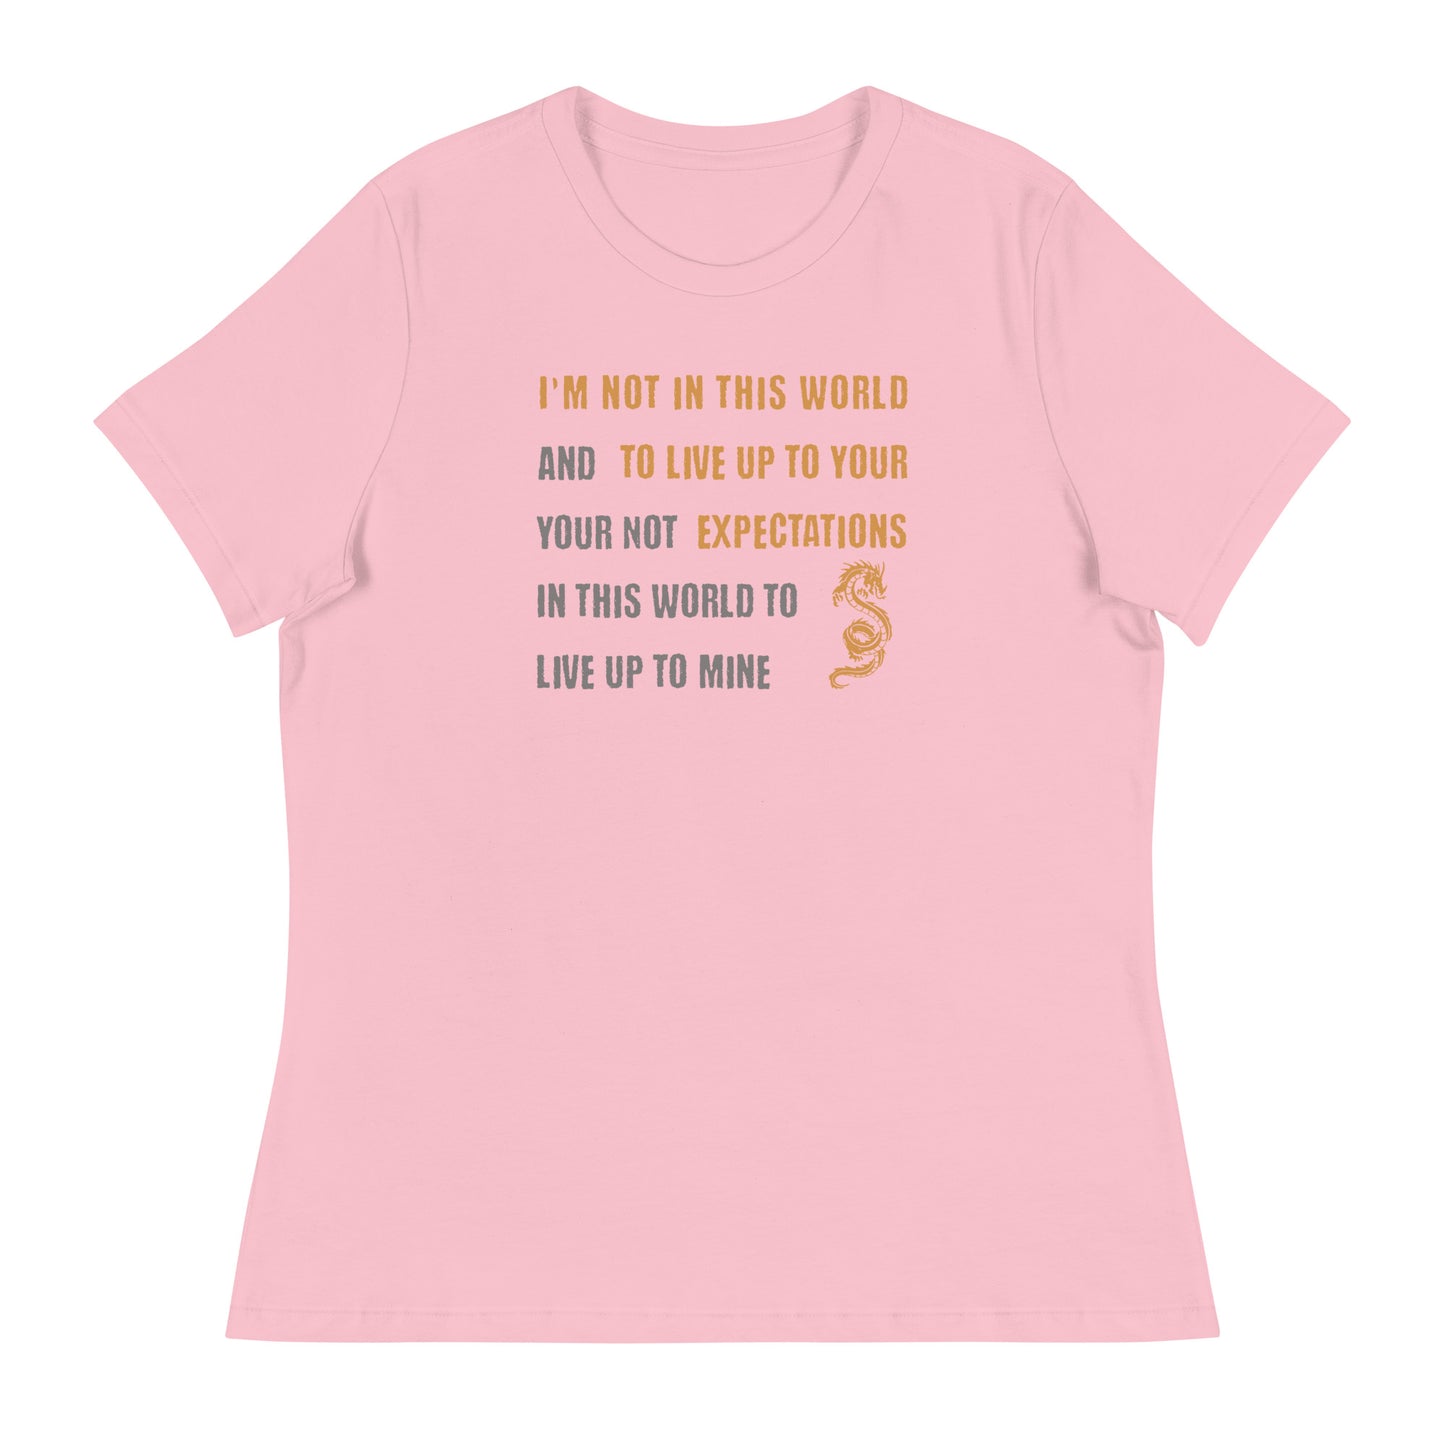 I'm Not Here To Live Up To Your Expectations Women's T-Shirt Pink